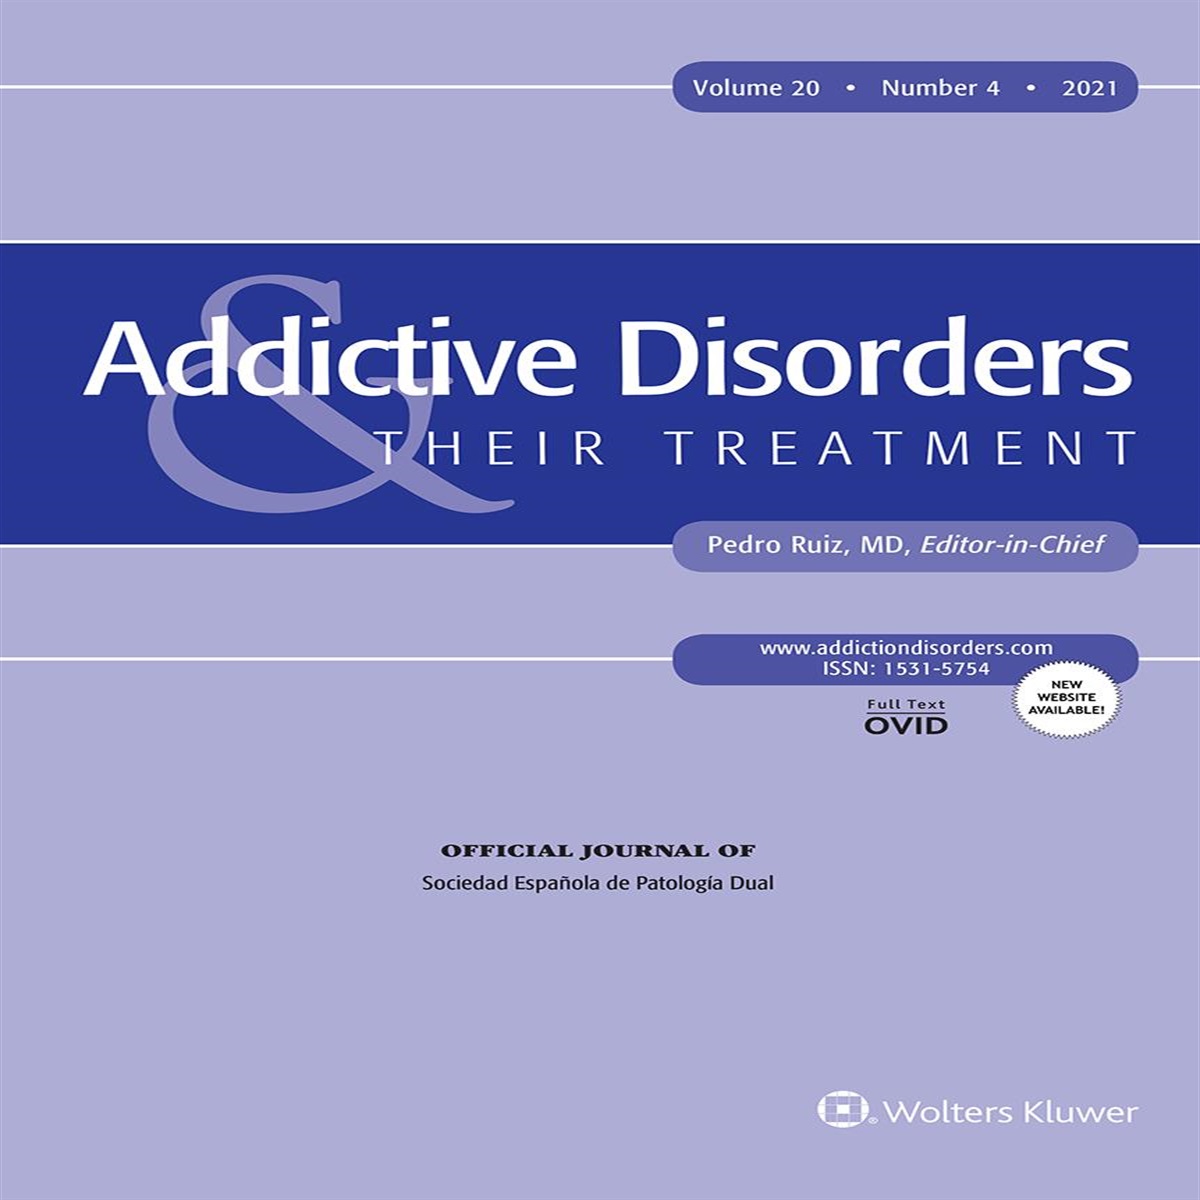 Anxiety, Depression, Psychological Symptoms, Negative Effects, and Other Symptoms of Nicotine Withdrawal